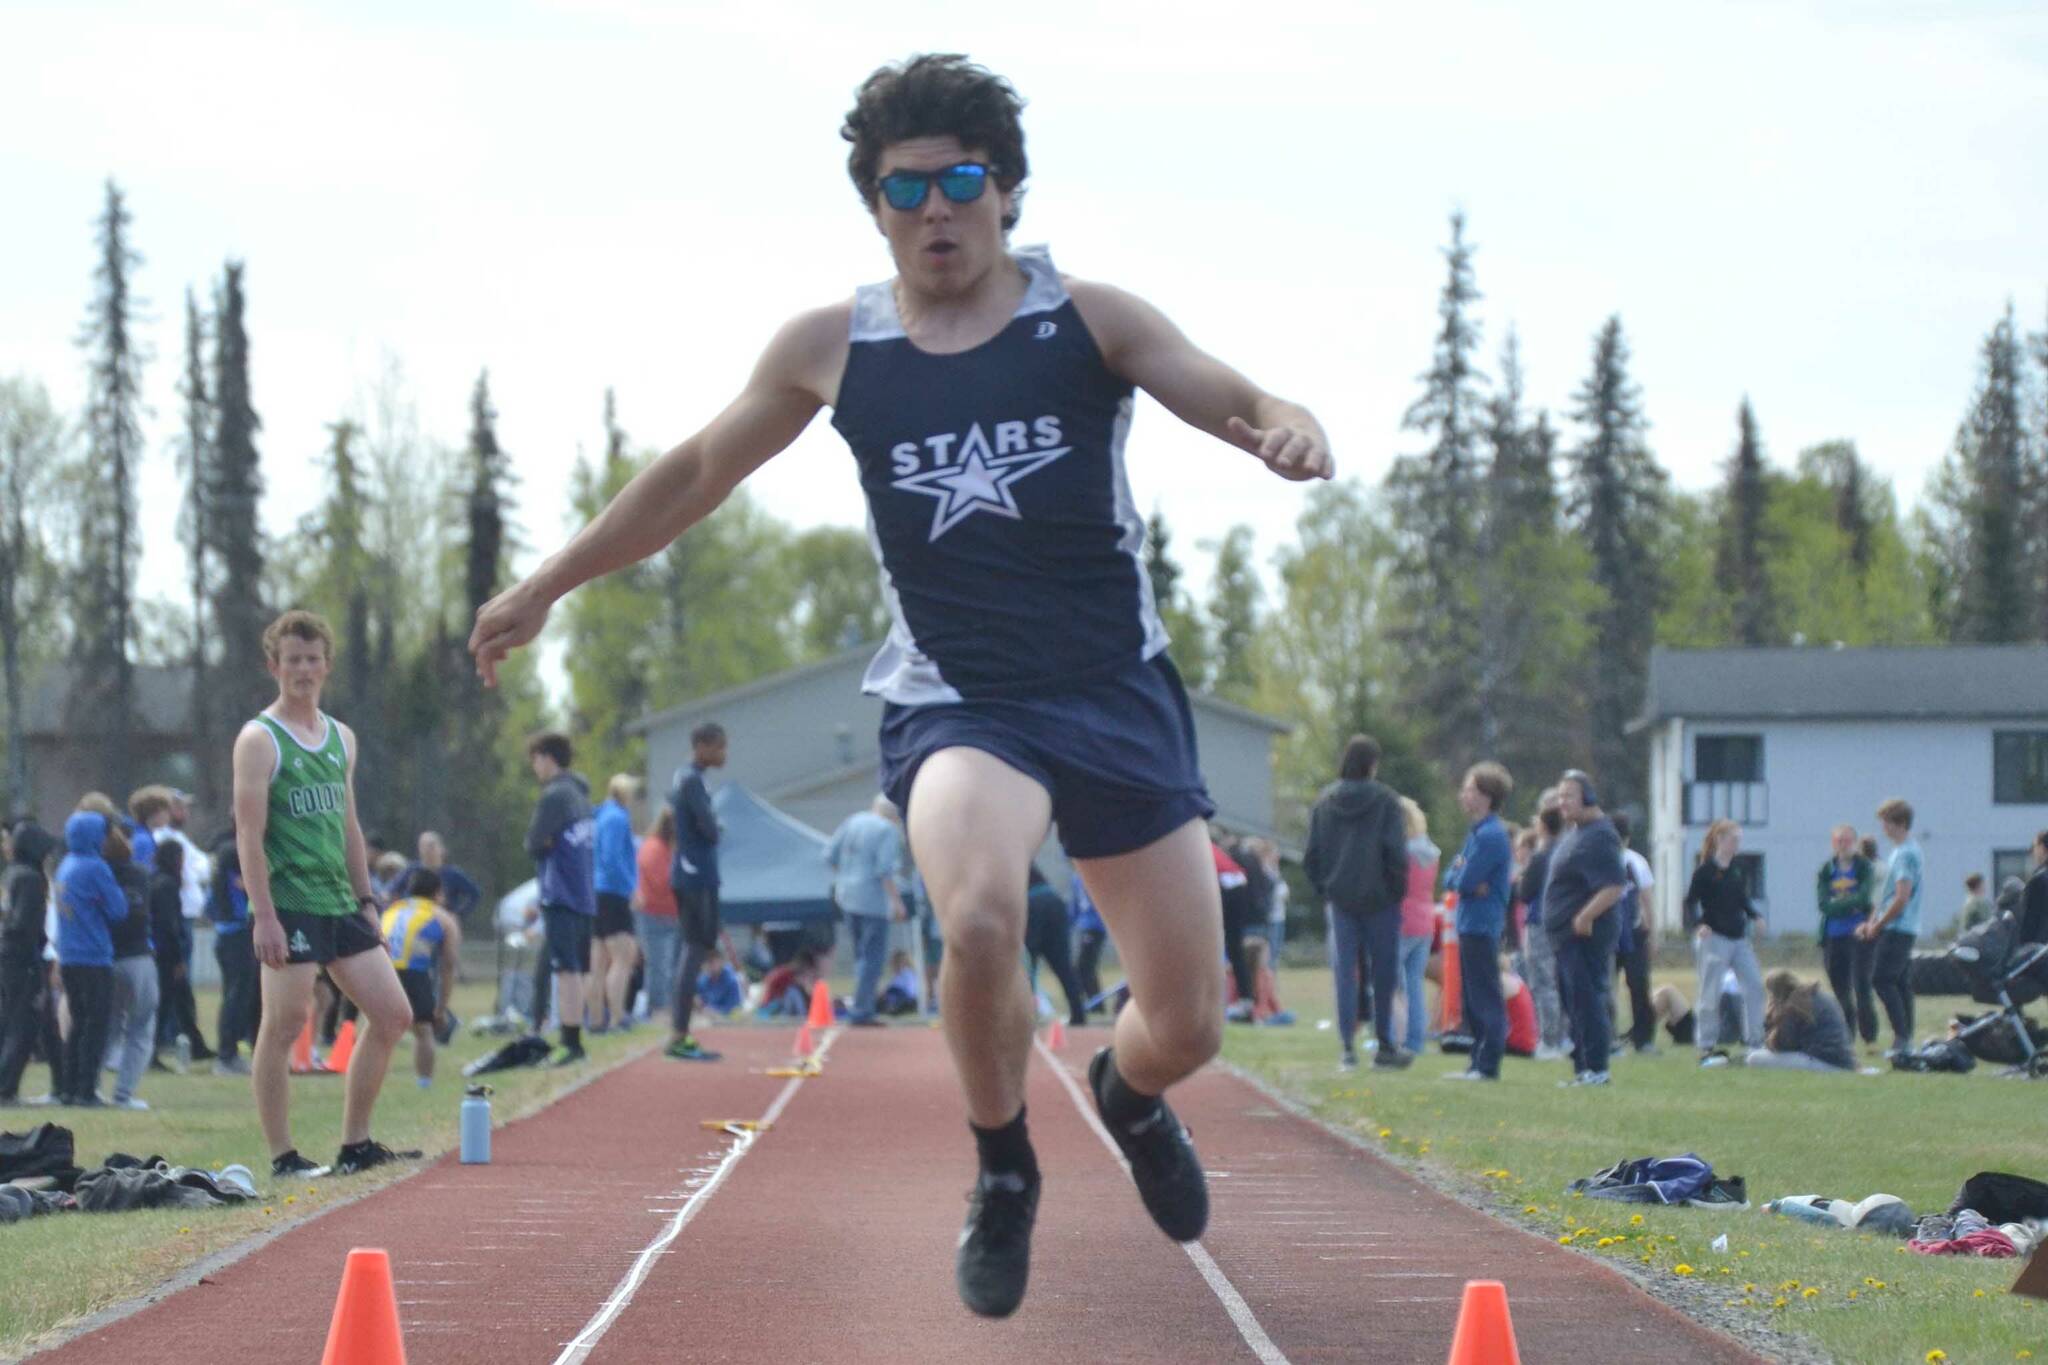 Soldotna's Isaac Chavarria competes in the triple jump at the Region 3/Division I meet at Ed Hollier Field at Kenai Central High School in Kenai, Alaska, on Saturday, May 21, 2022. (Photo by Jeff Helminiak/Peninsula Clarion)